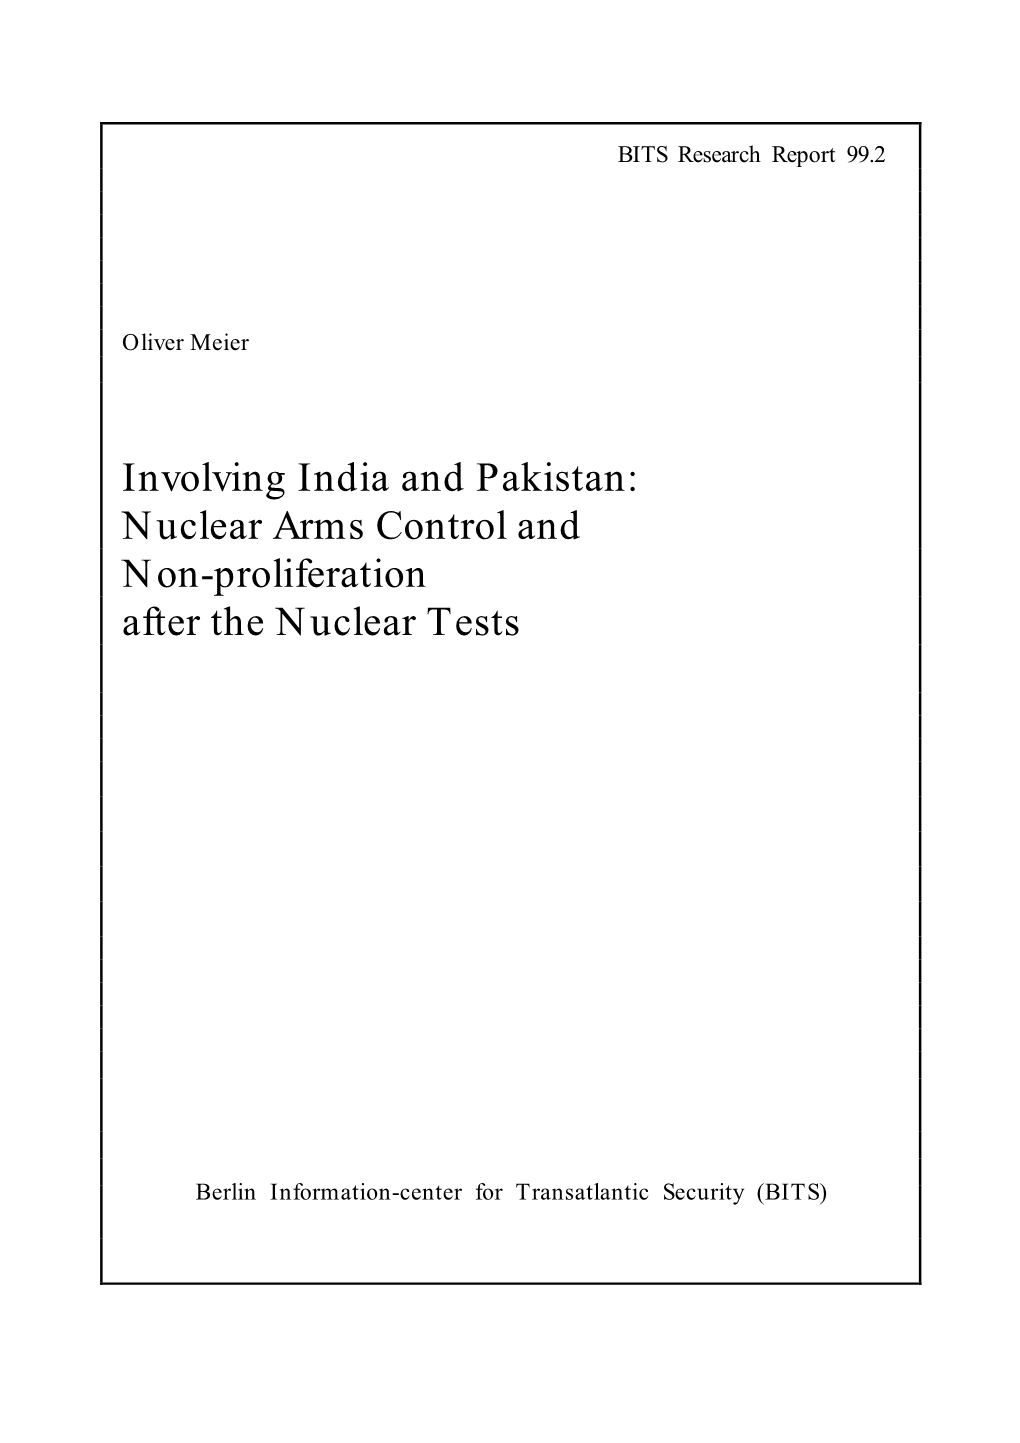 Involving India and Pakistan: Nuclear Arms Control and Non-Proliferation After the Nuclear Tests